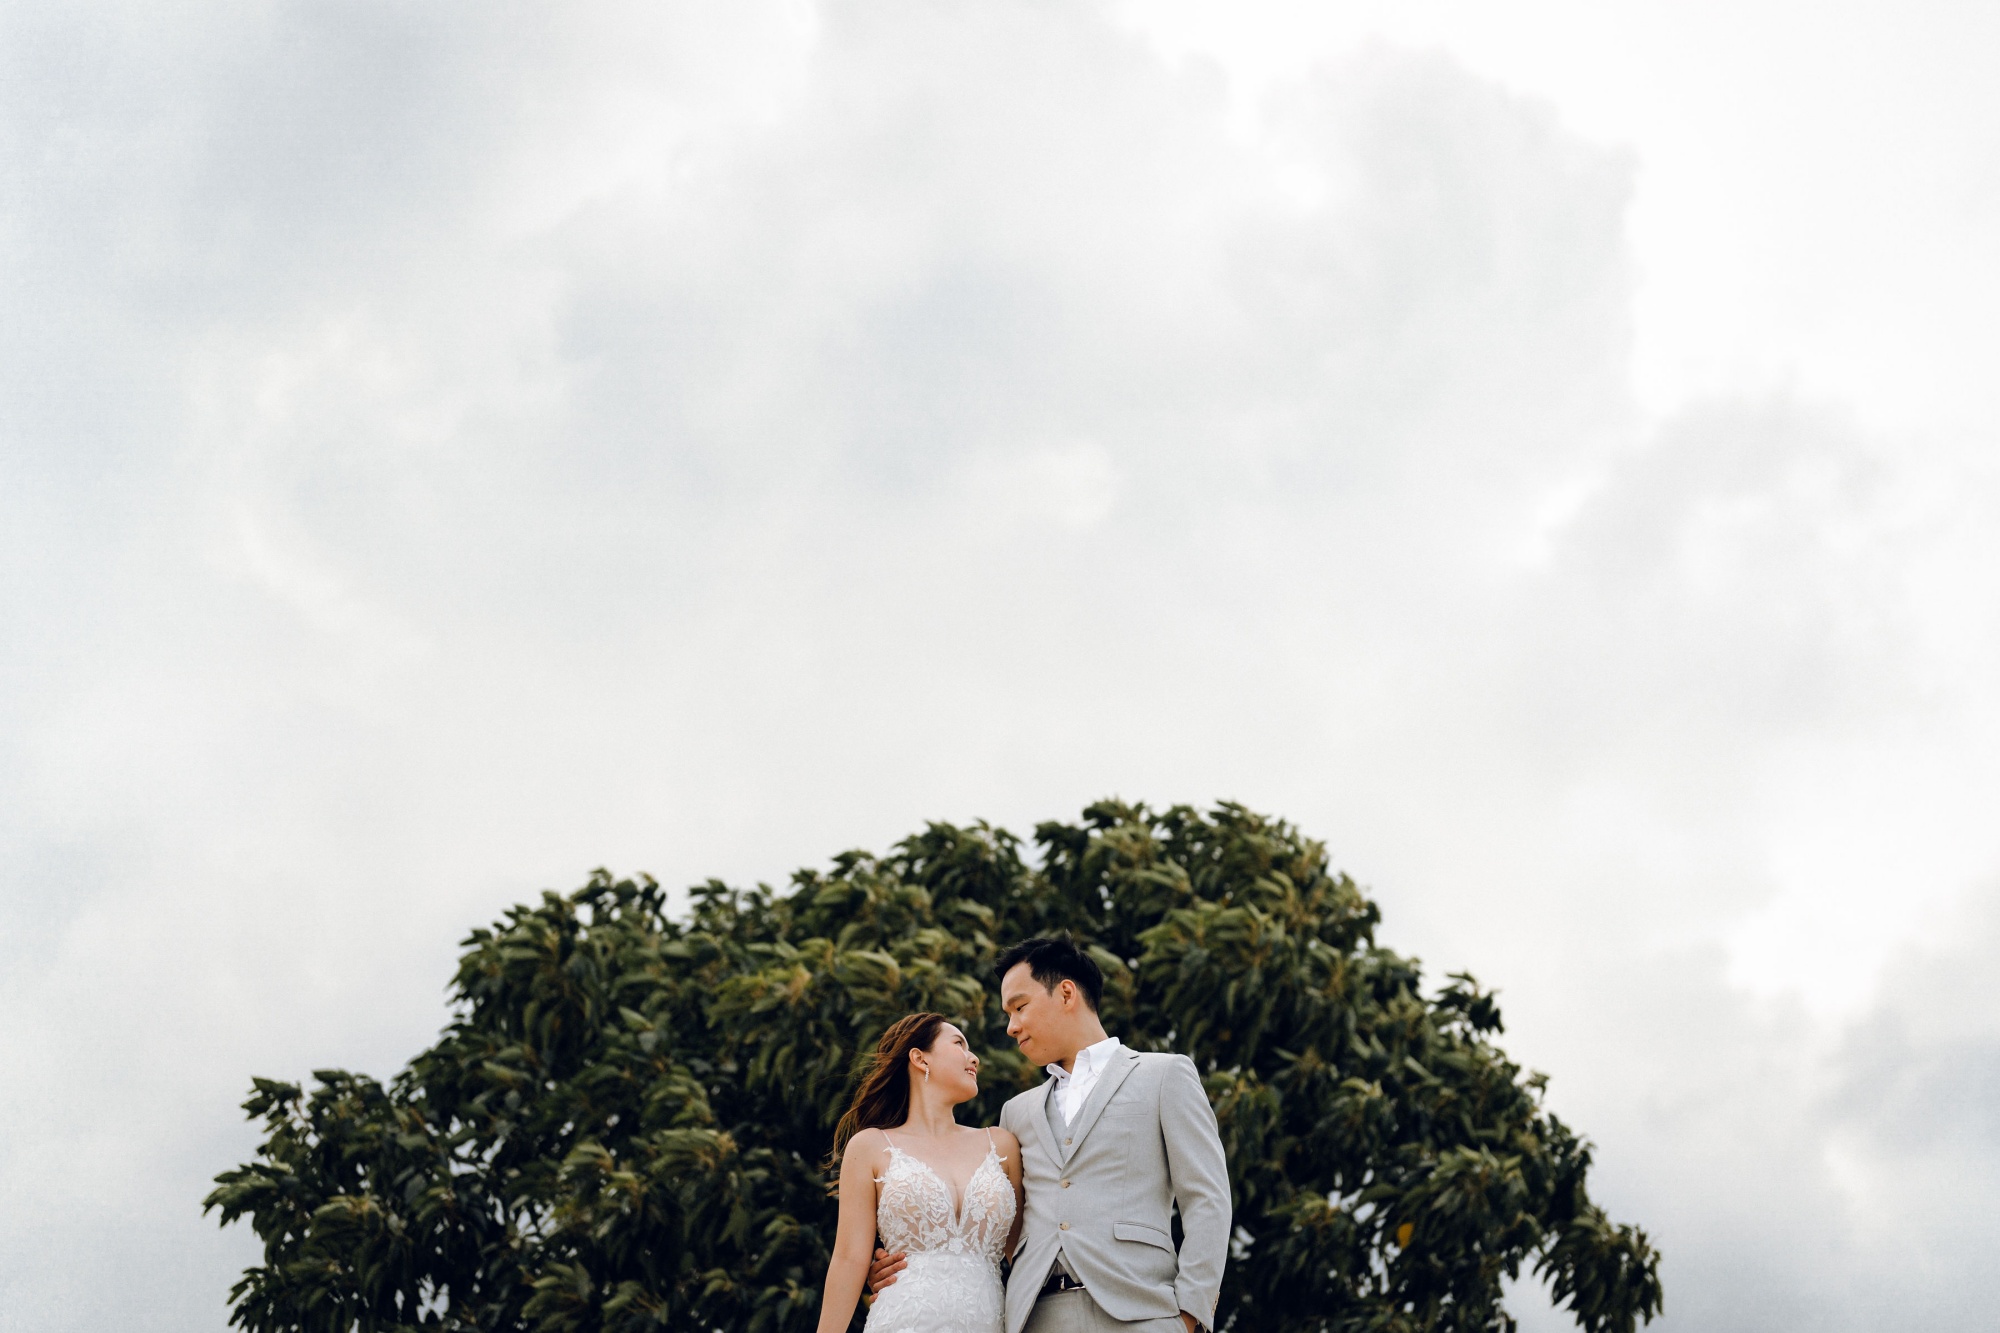 Prewedding Photoshoot At East Coast Park And Industrial Rooftop by Michael on OneThreeOneFour 11